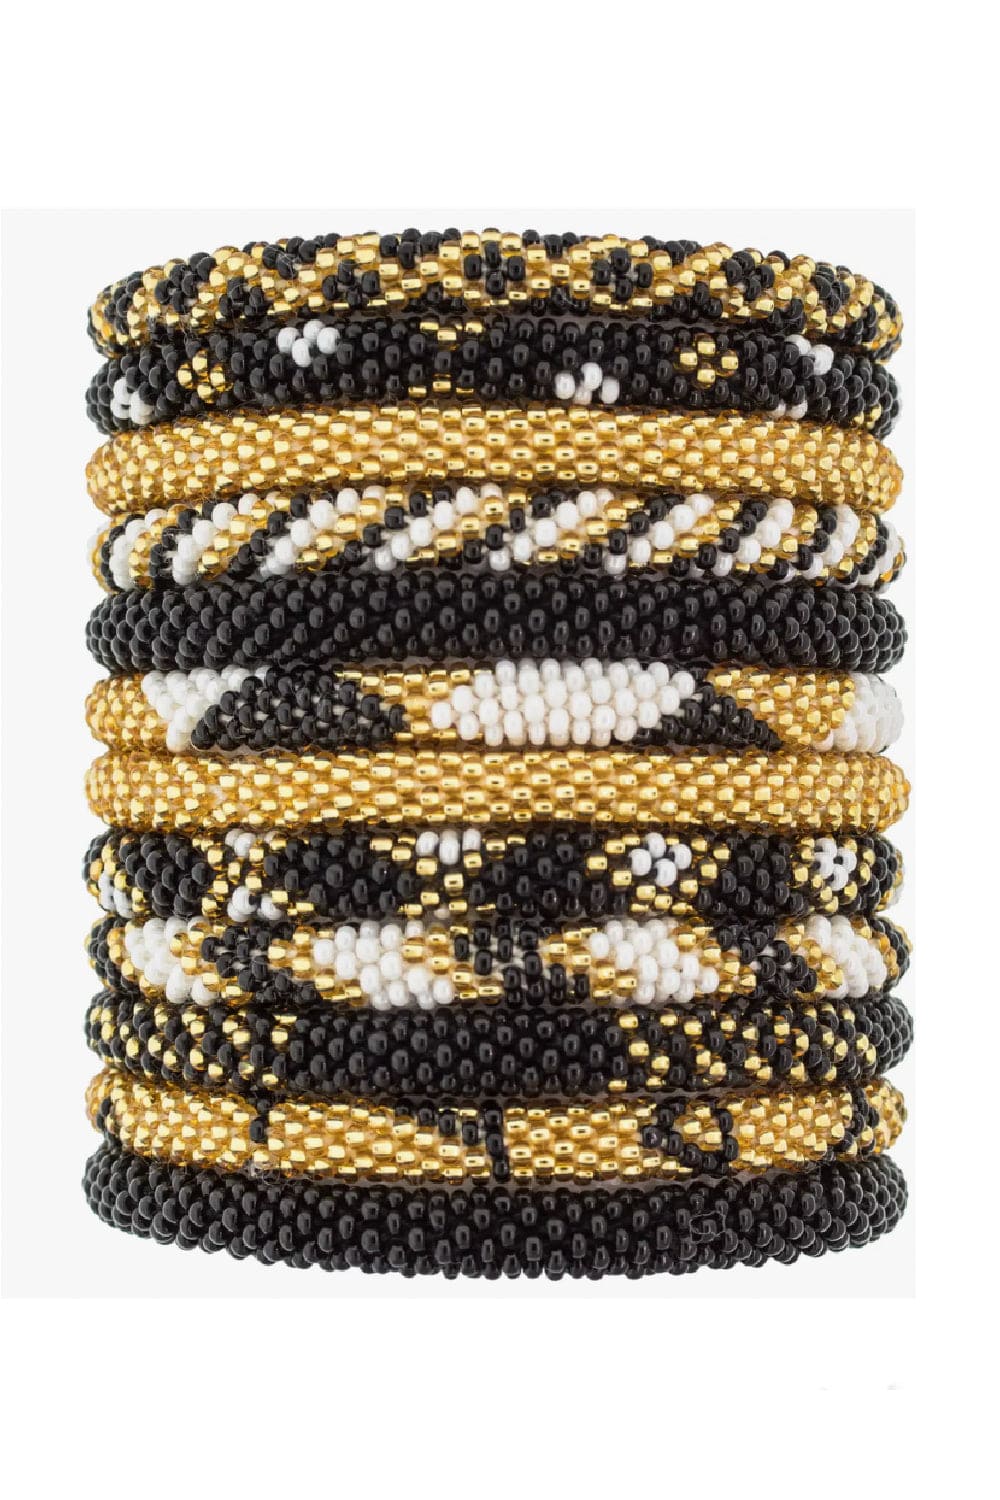 Stack of seed bead bracelets in different patterns.